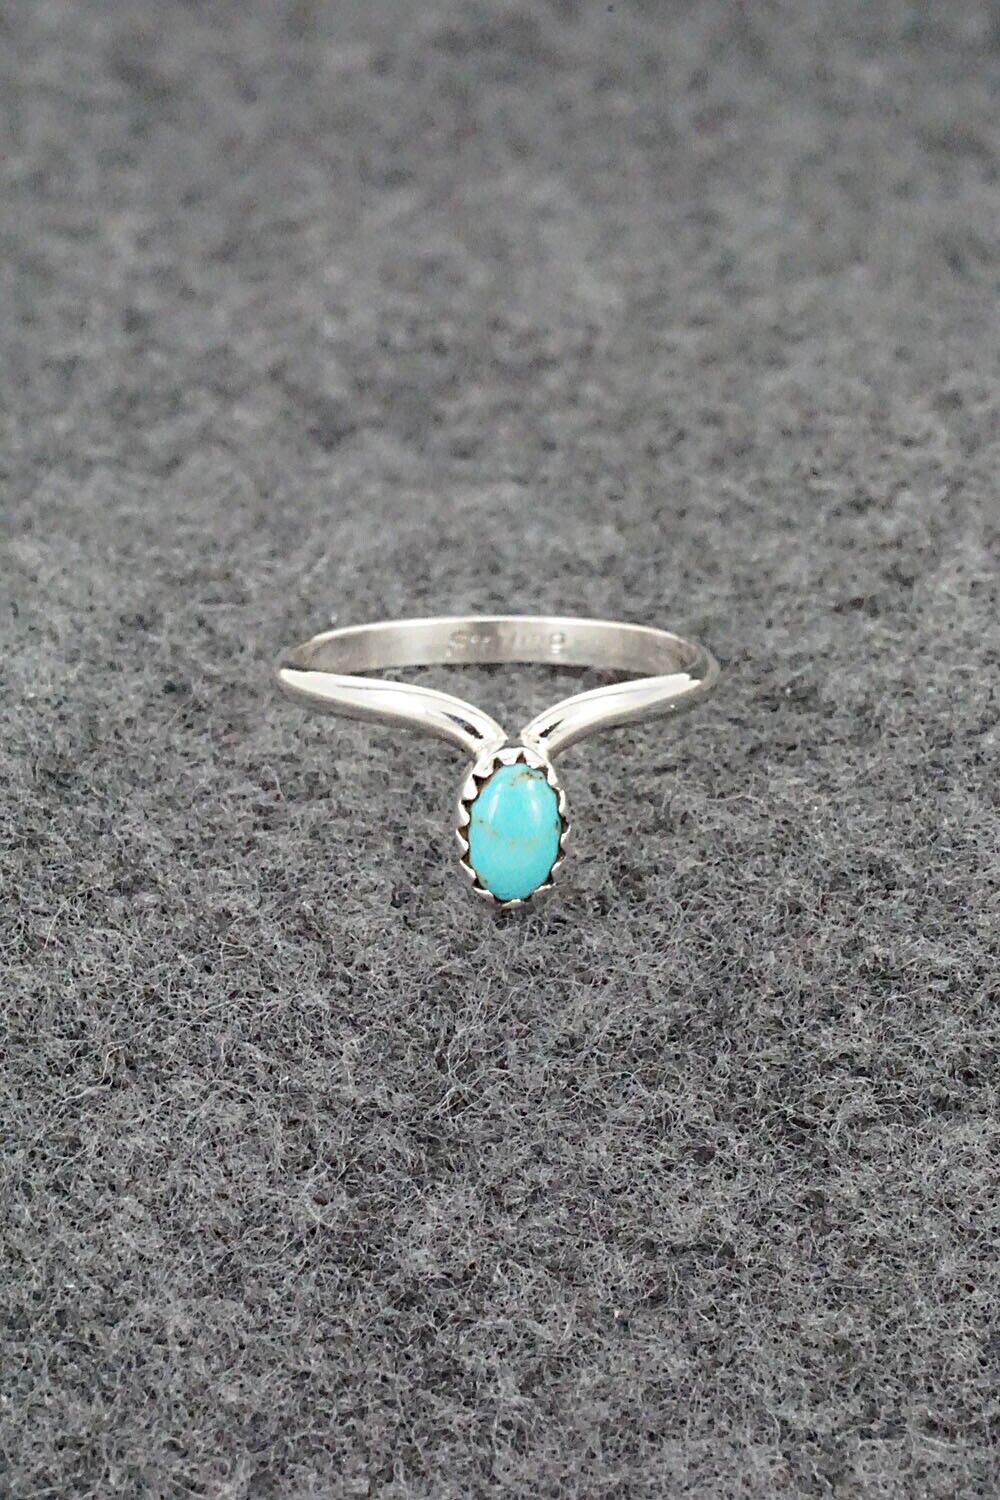 Turquoise & Sterling Silver Ring - Hiram Largo - Size 7.5